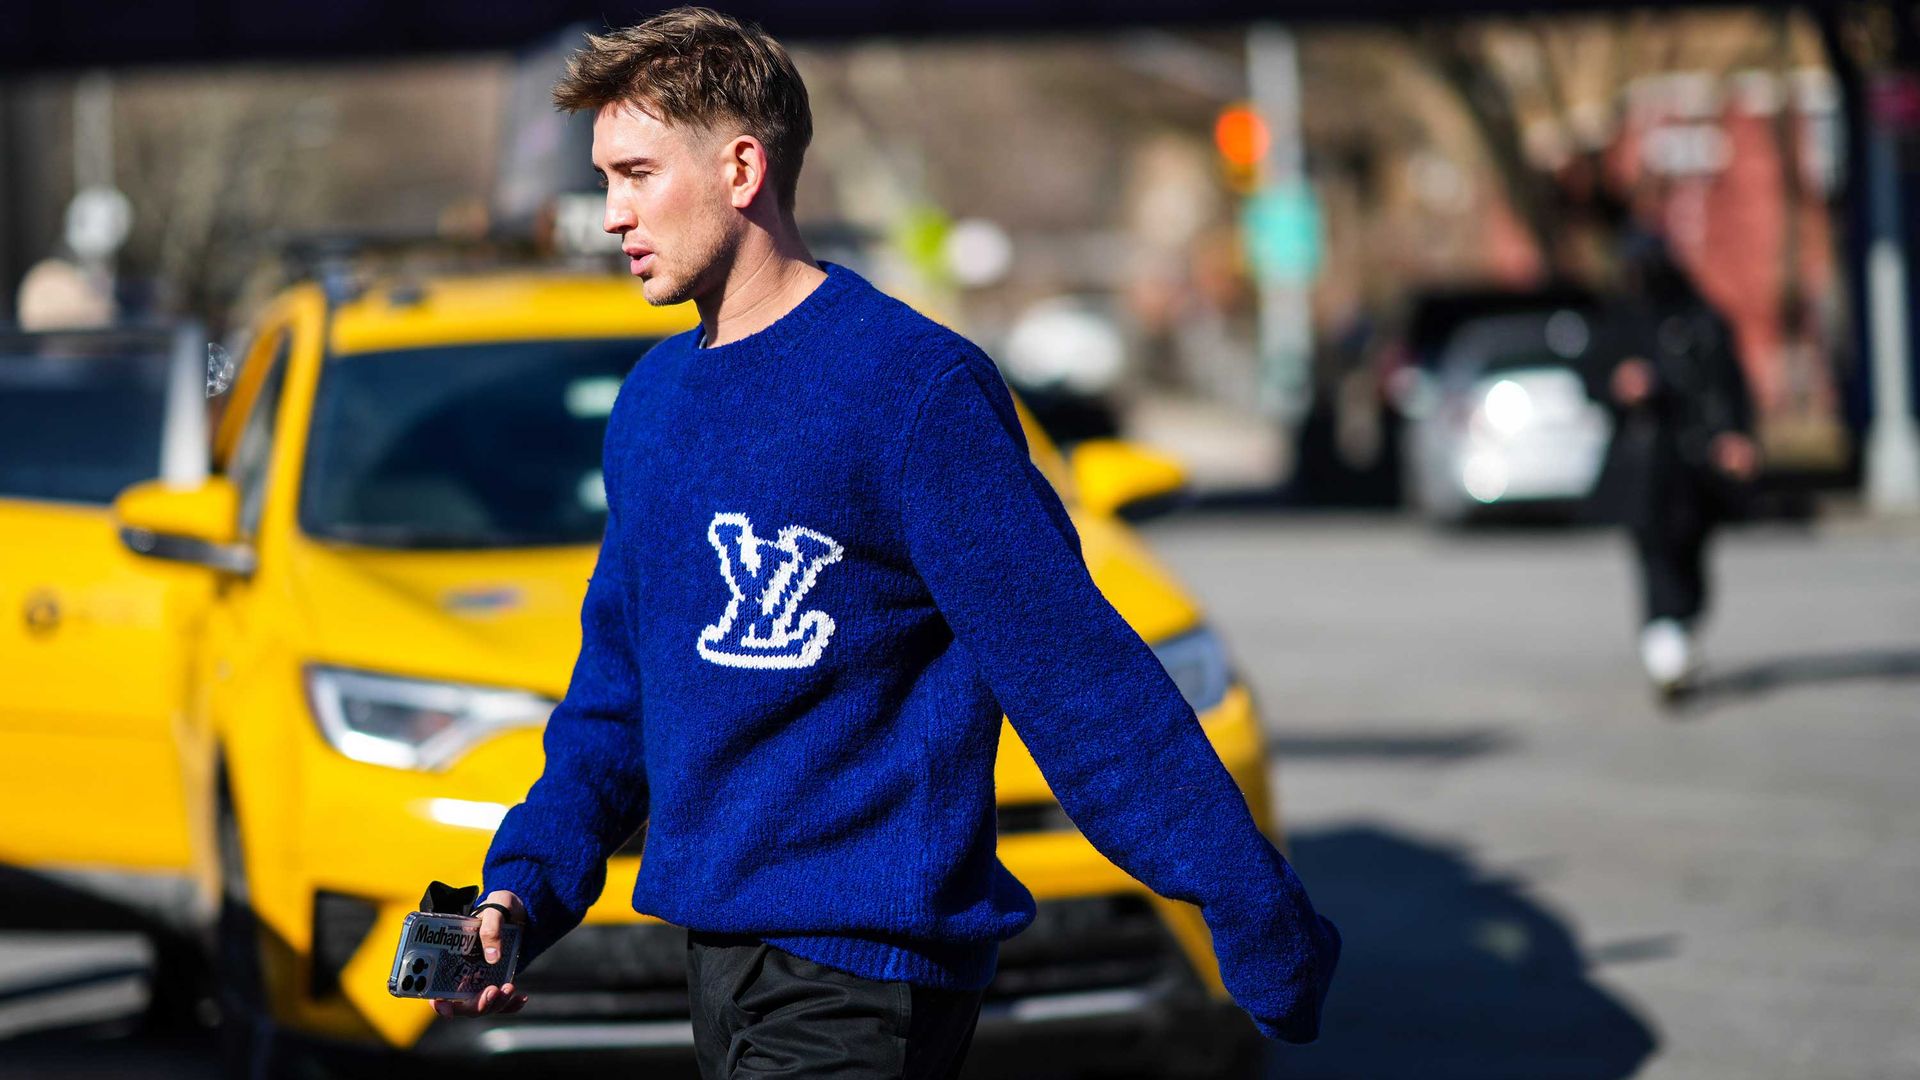 Fashion week goer wearing statement blue jumper in front of NY cab